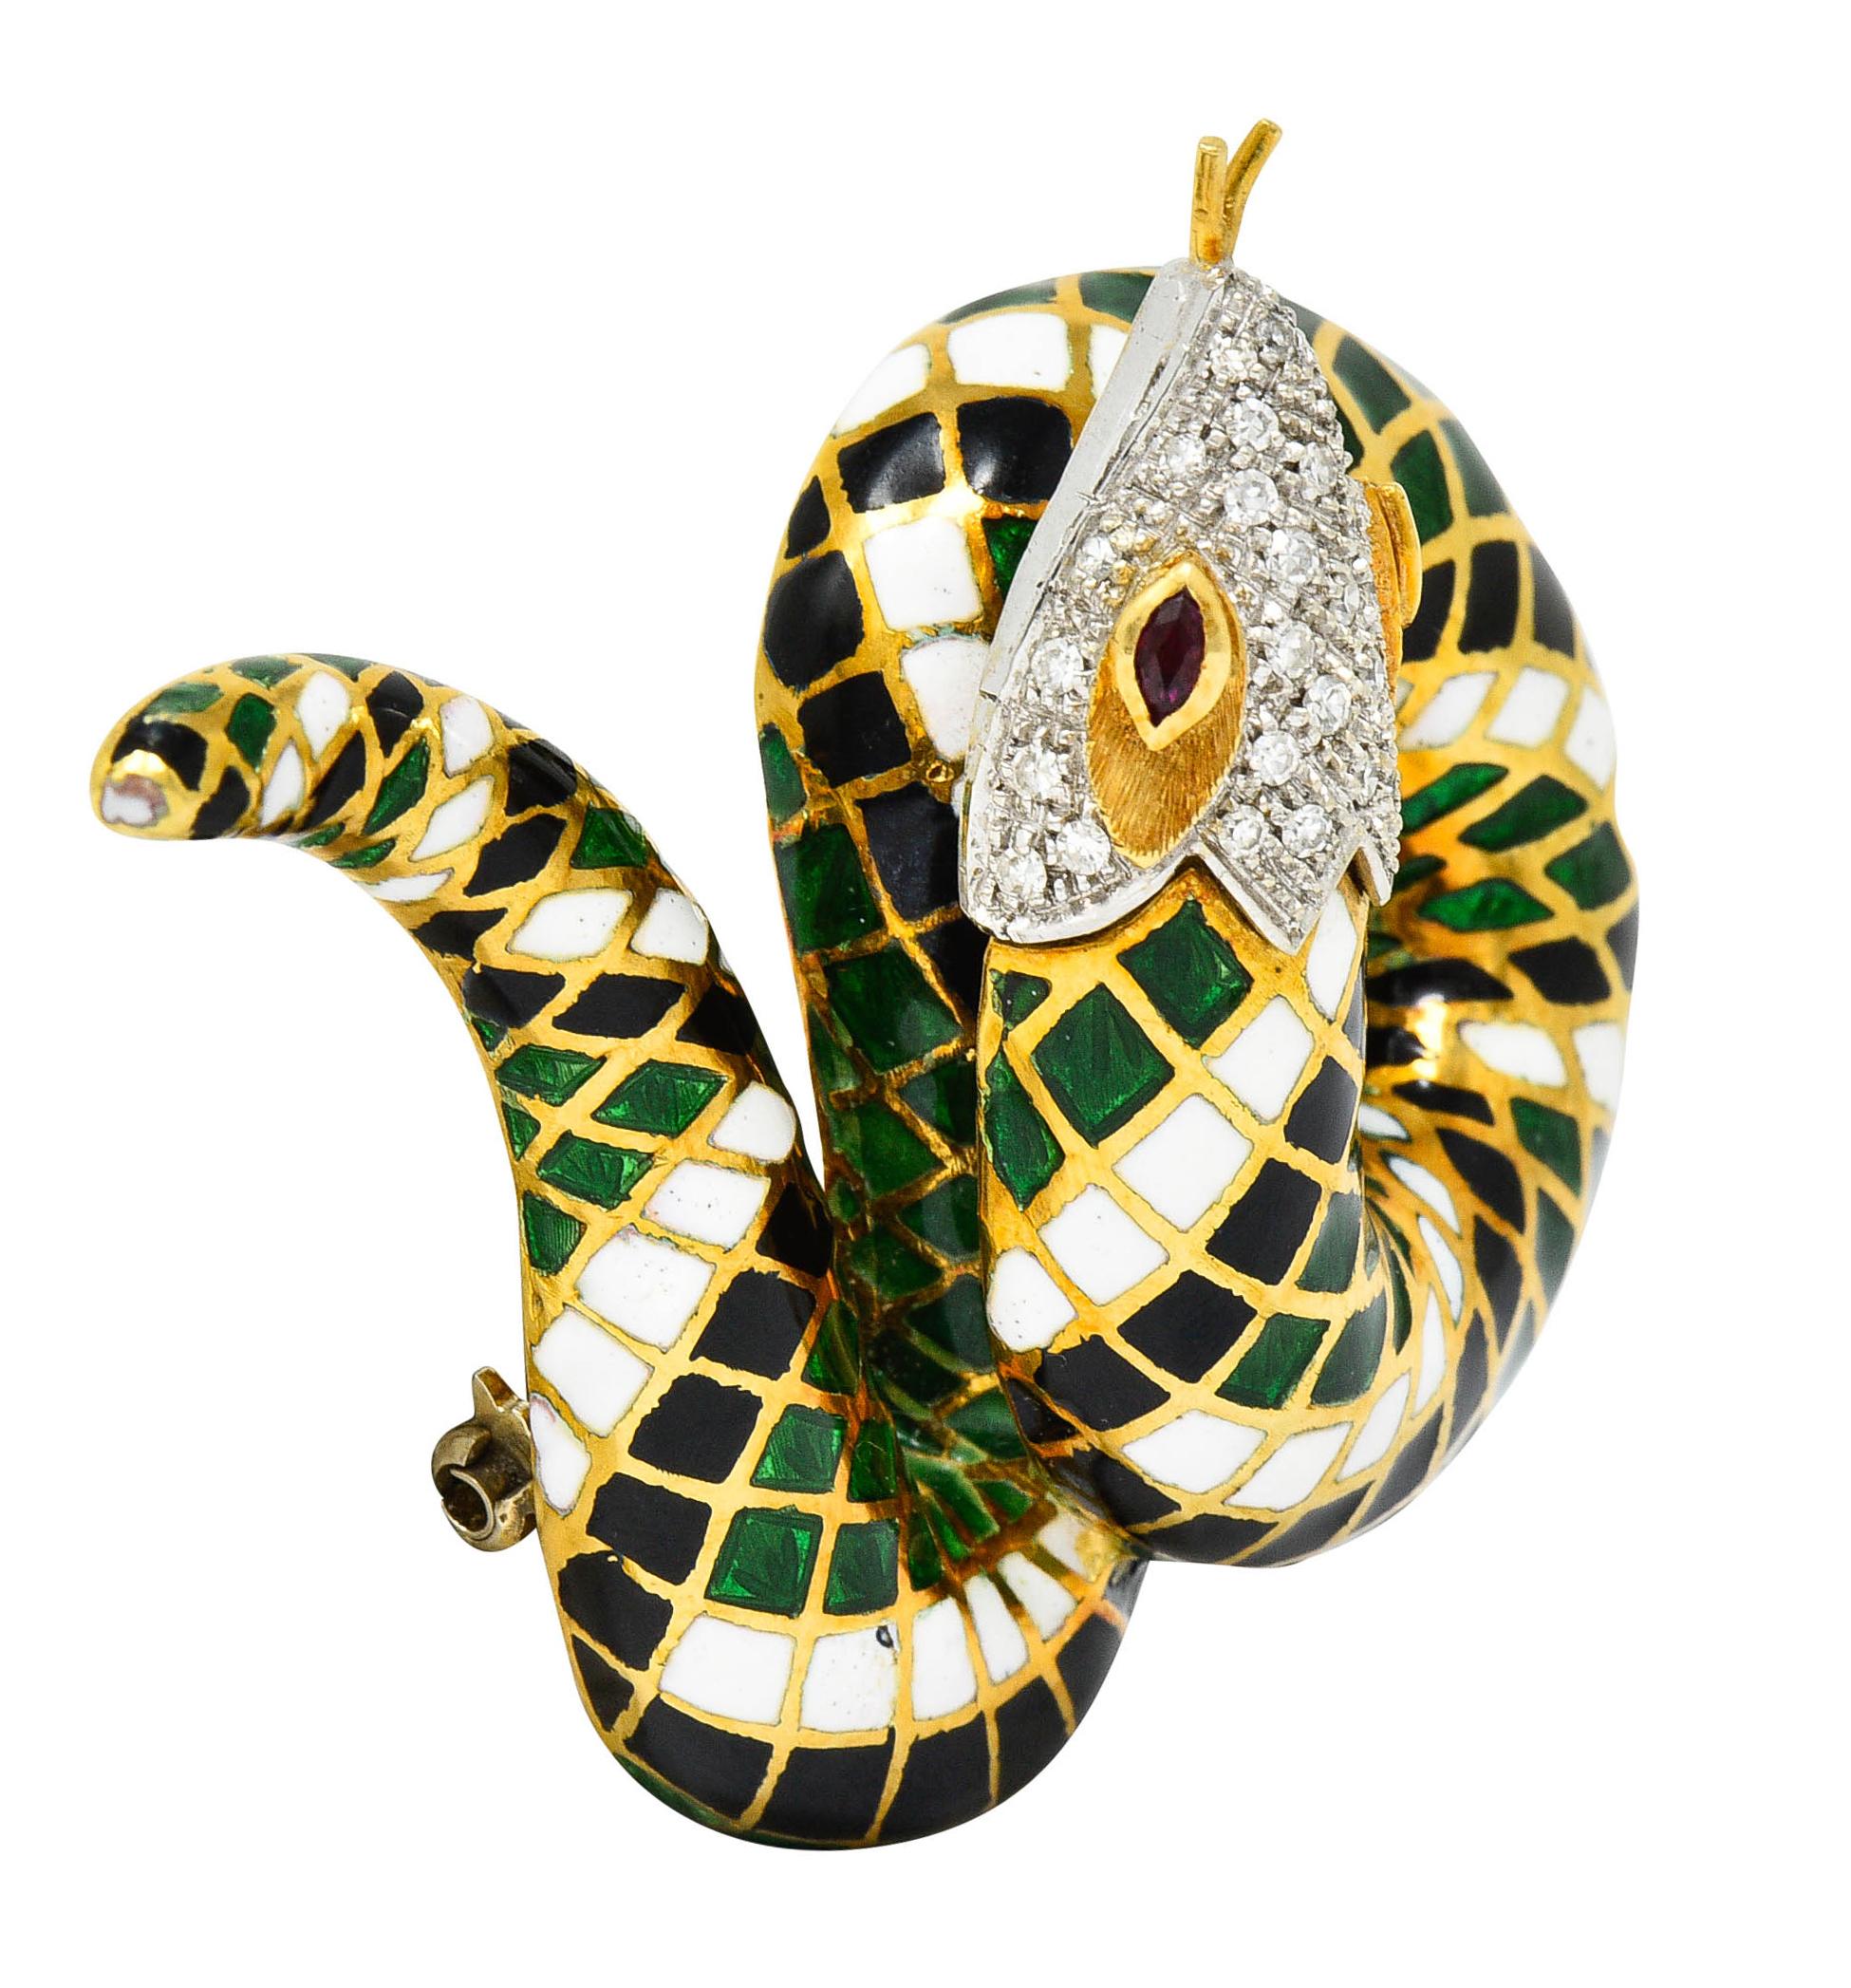 Designed as a coiling snake featuring a harlequin scale pattern throughout

Glossed with green, white, and black enamel that exhibits some loss - consistent with quality and age

Head is pavè set with single cut diamonds weighing in total